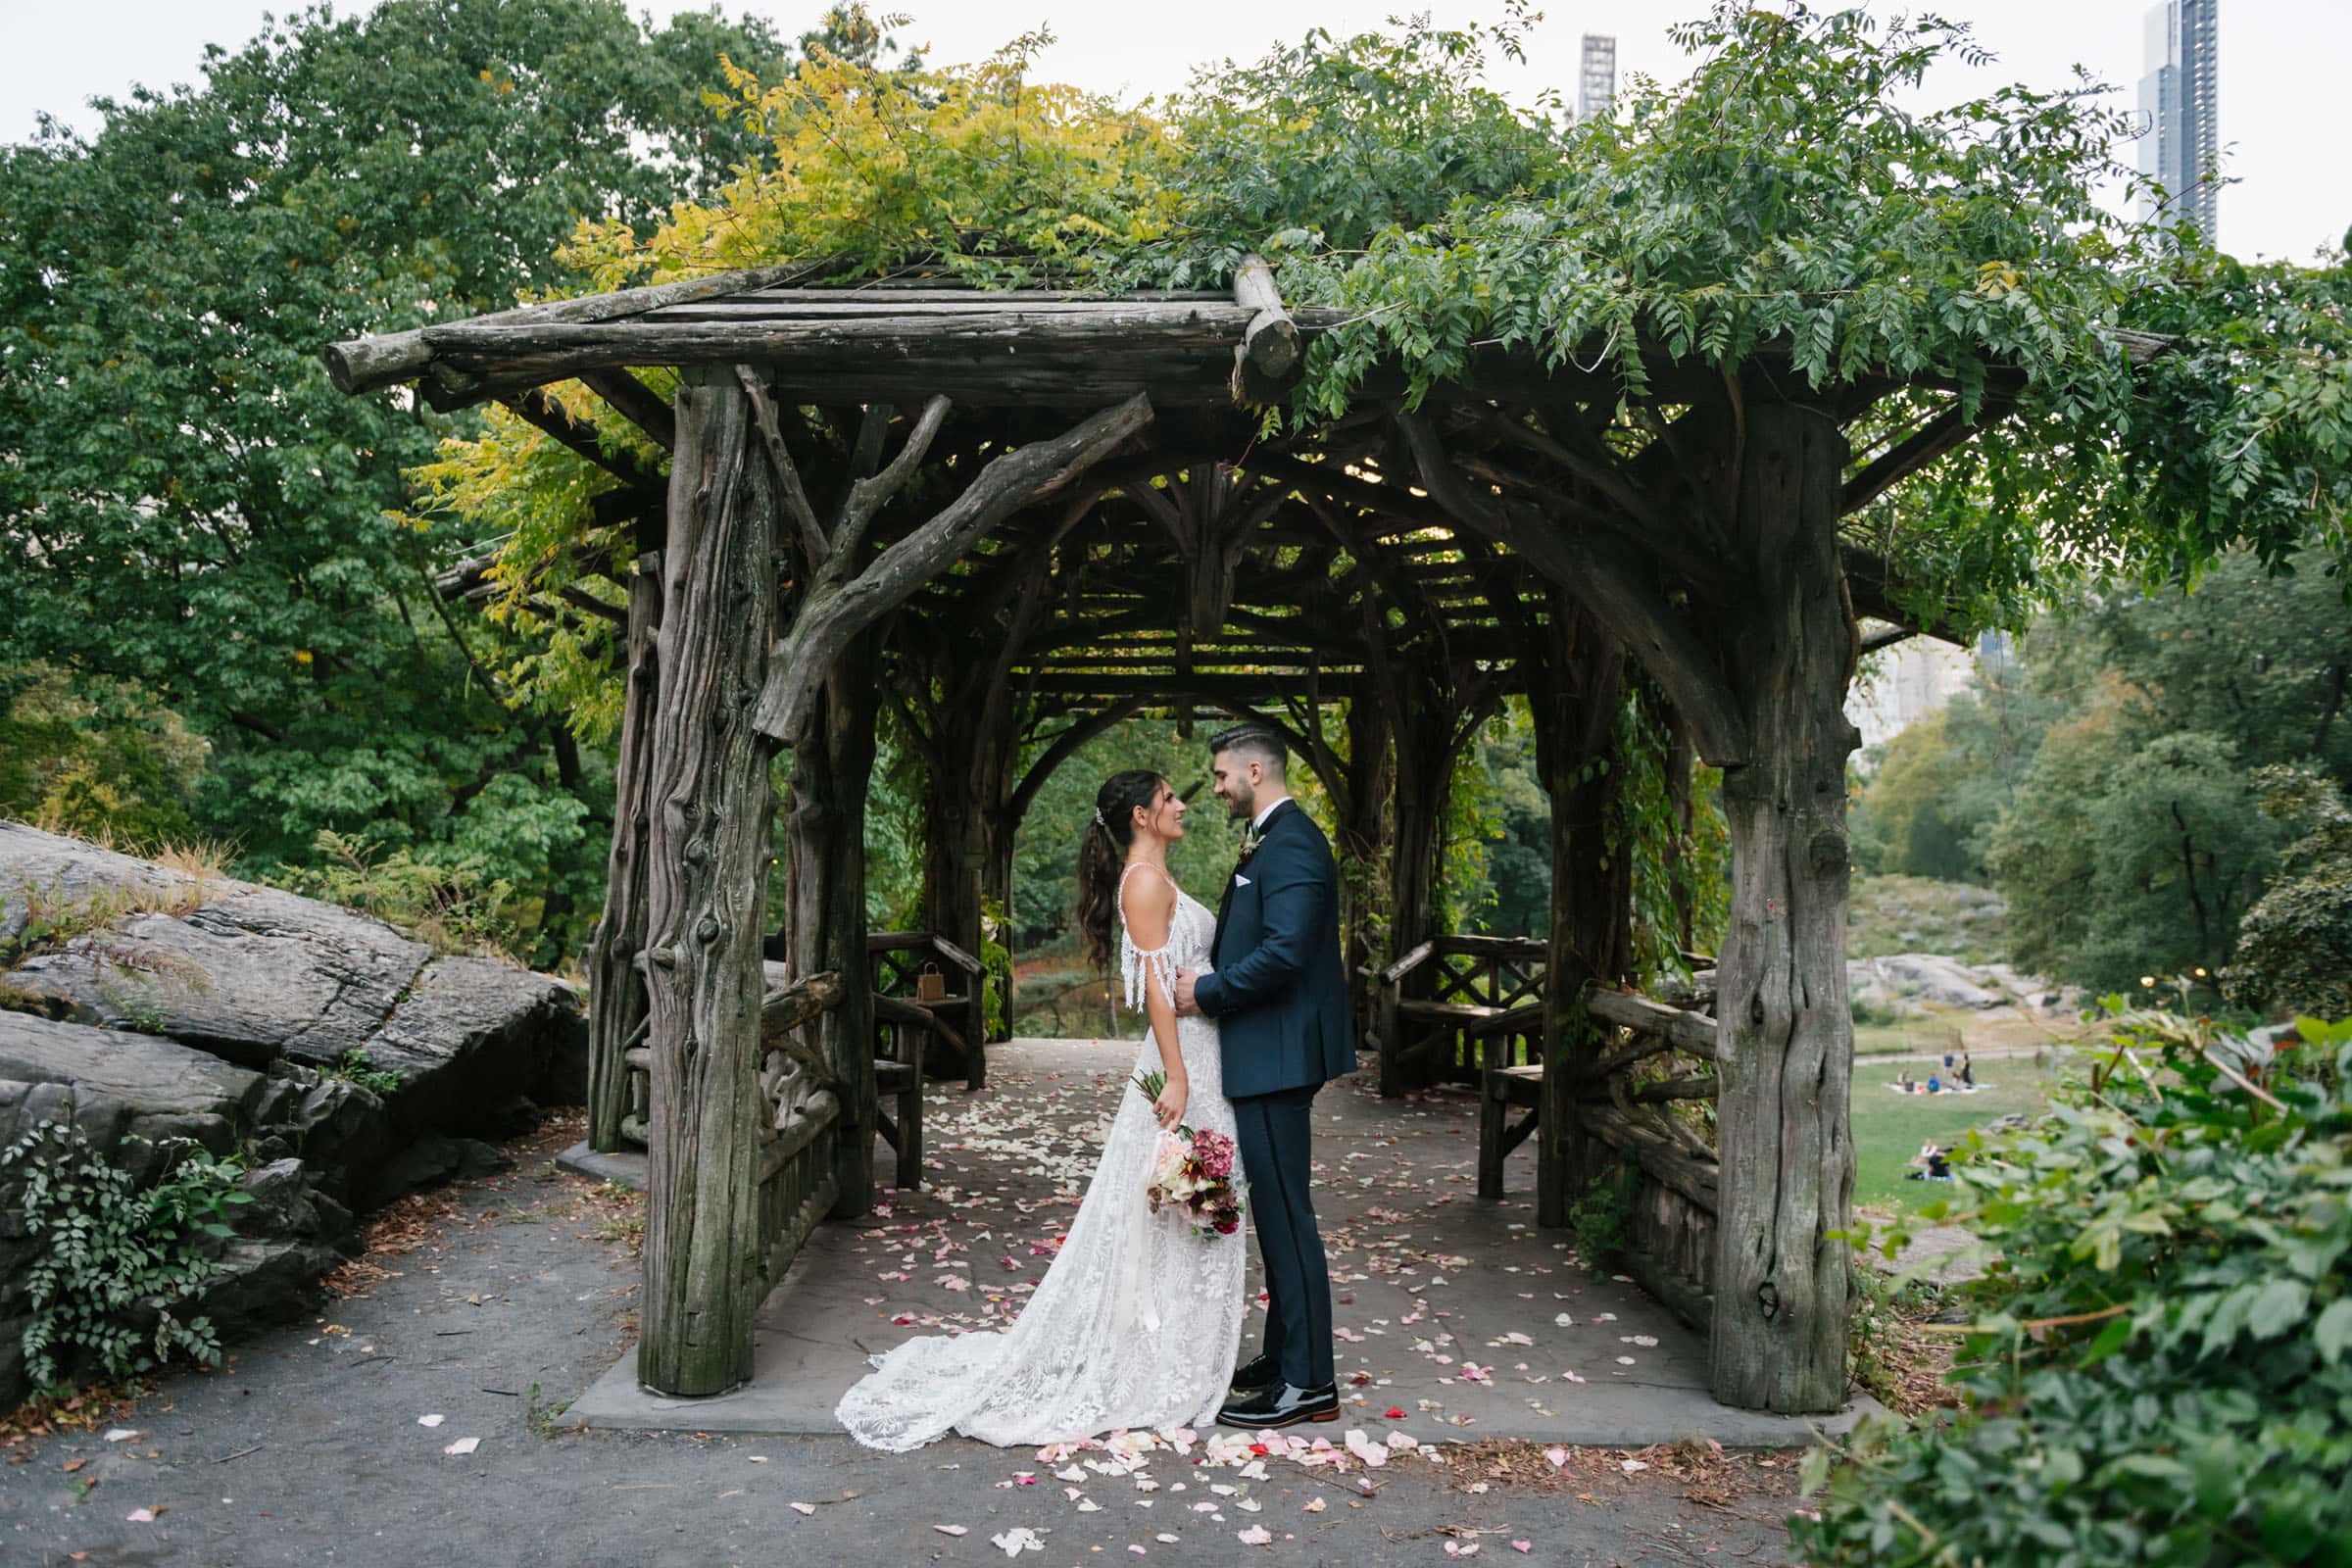 A treehouse for dreaming wedding in Central Park, New York City